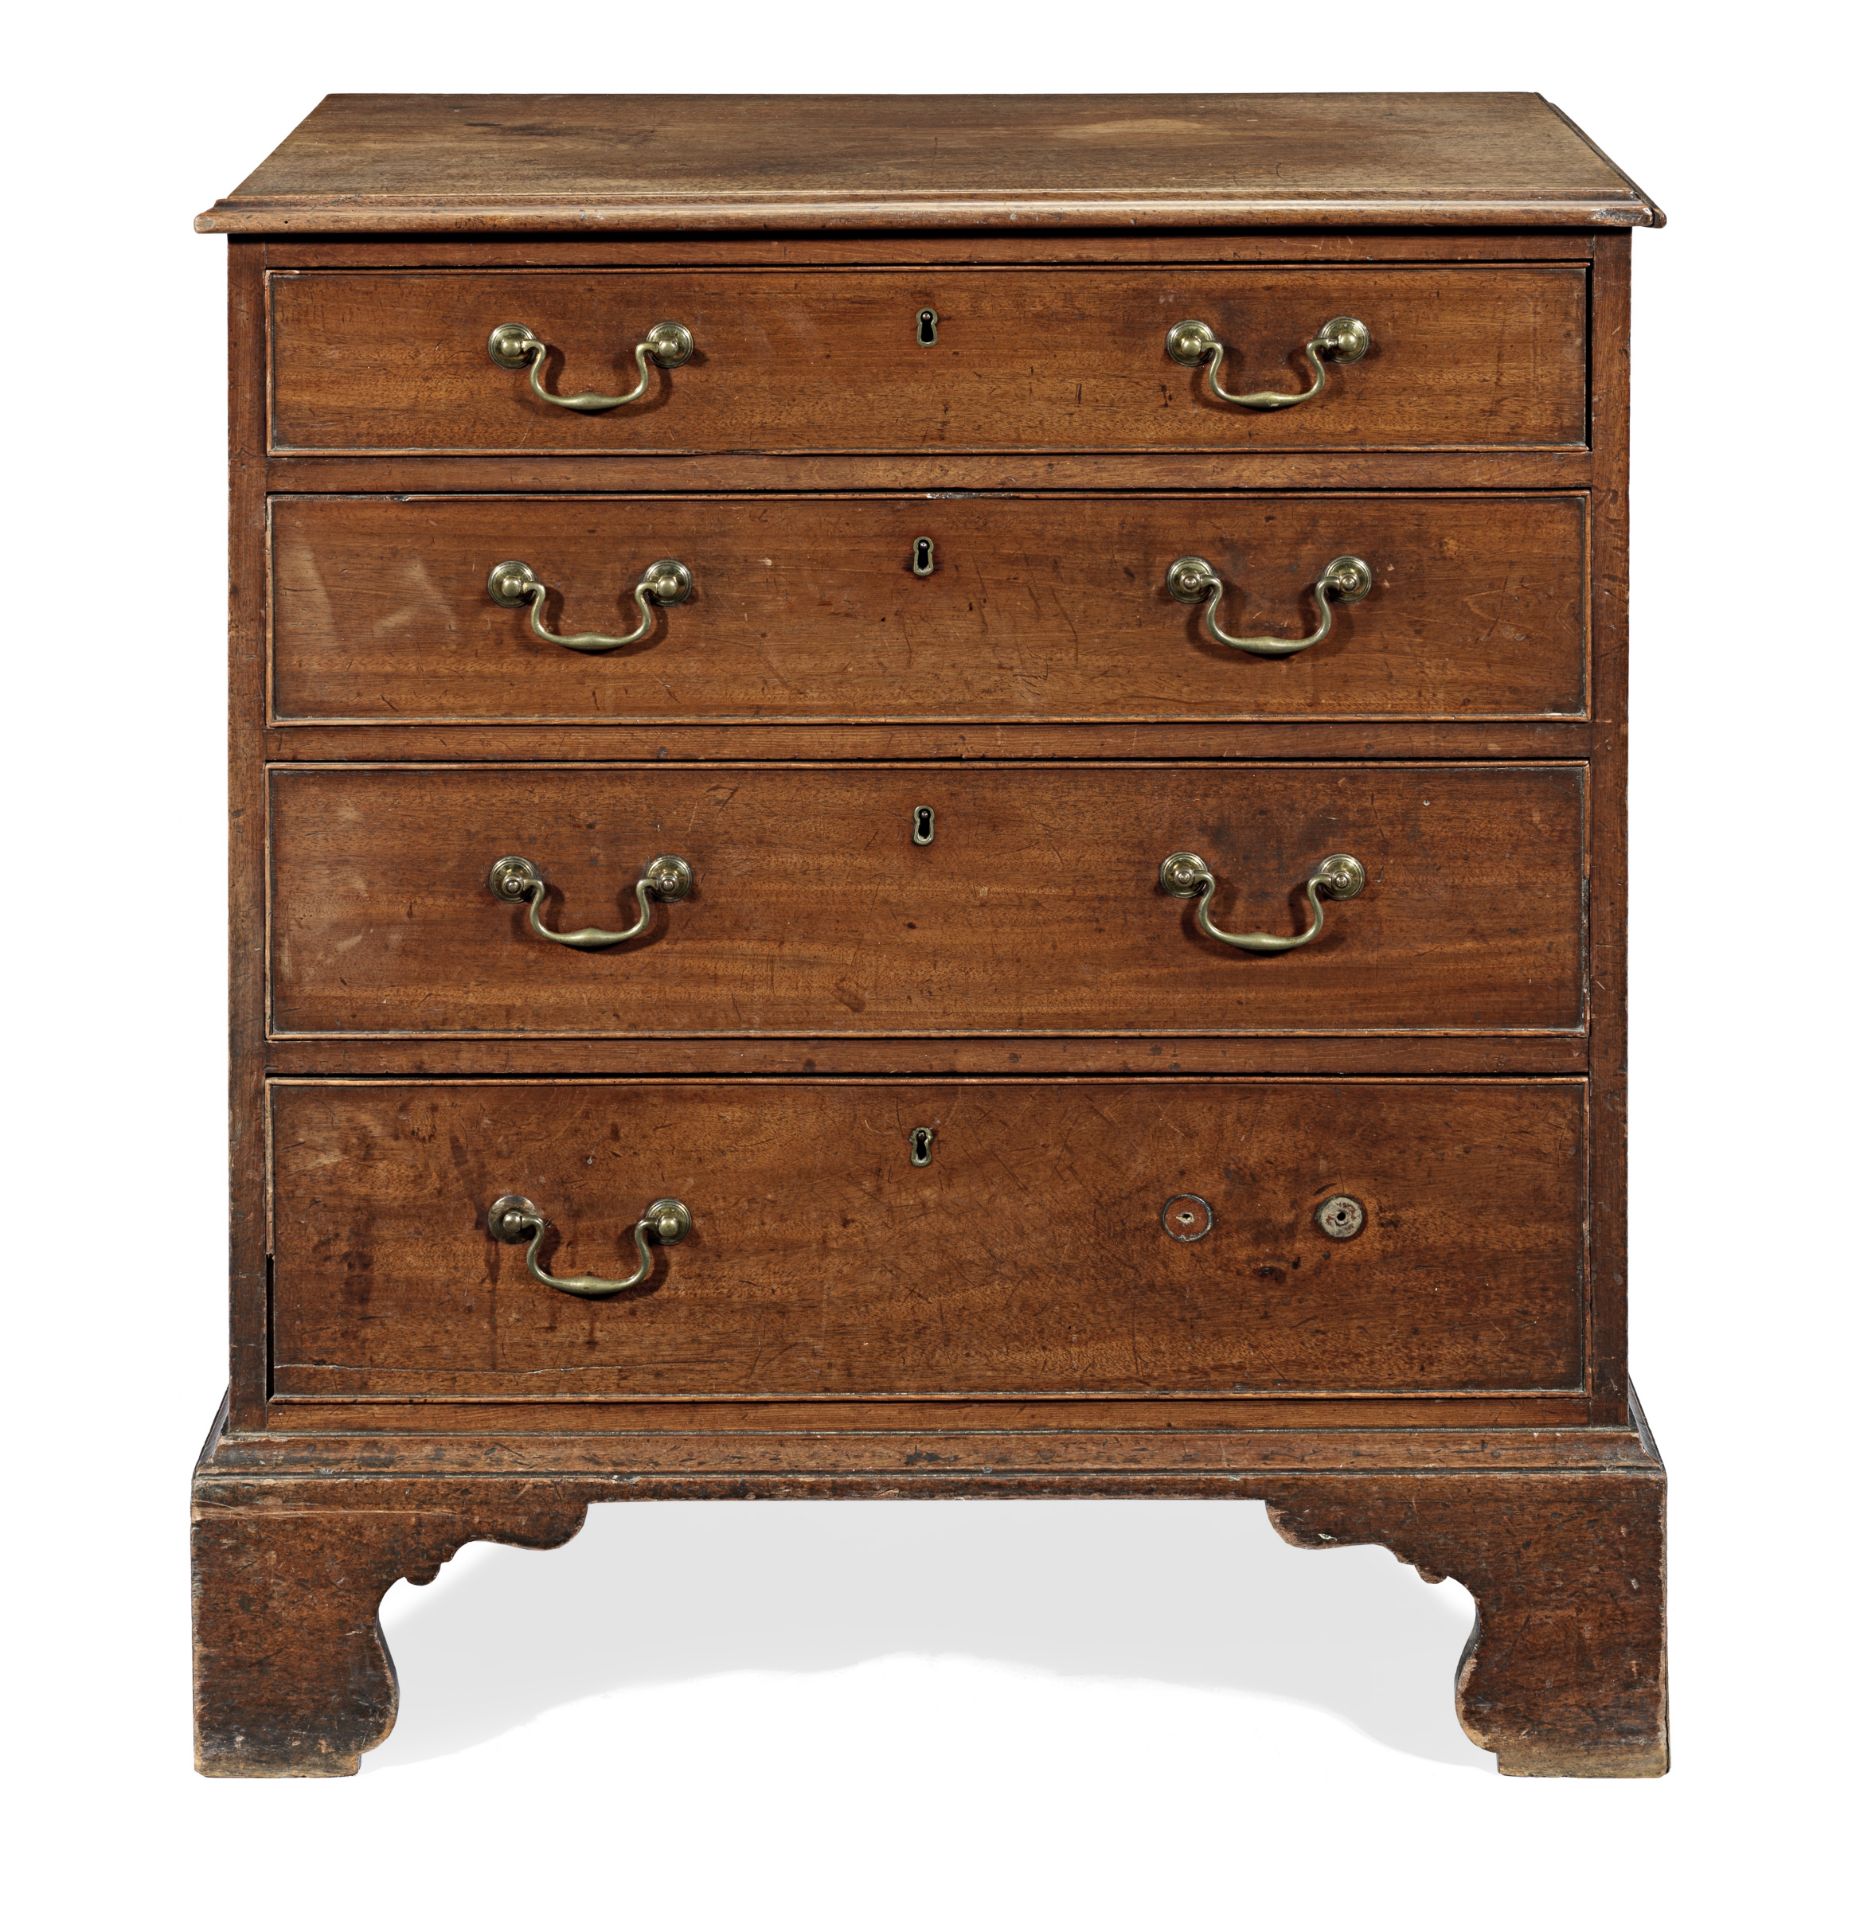 A George III mahogany chest of small proportions